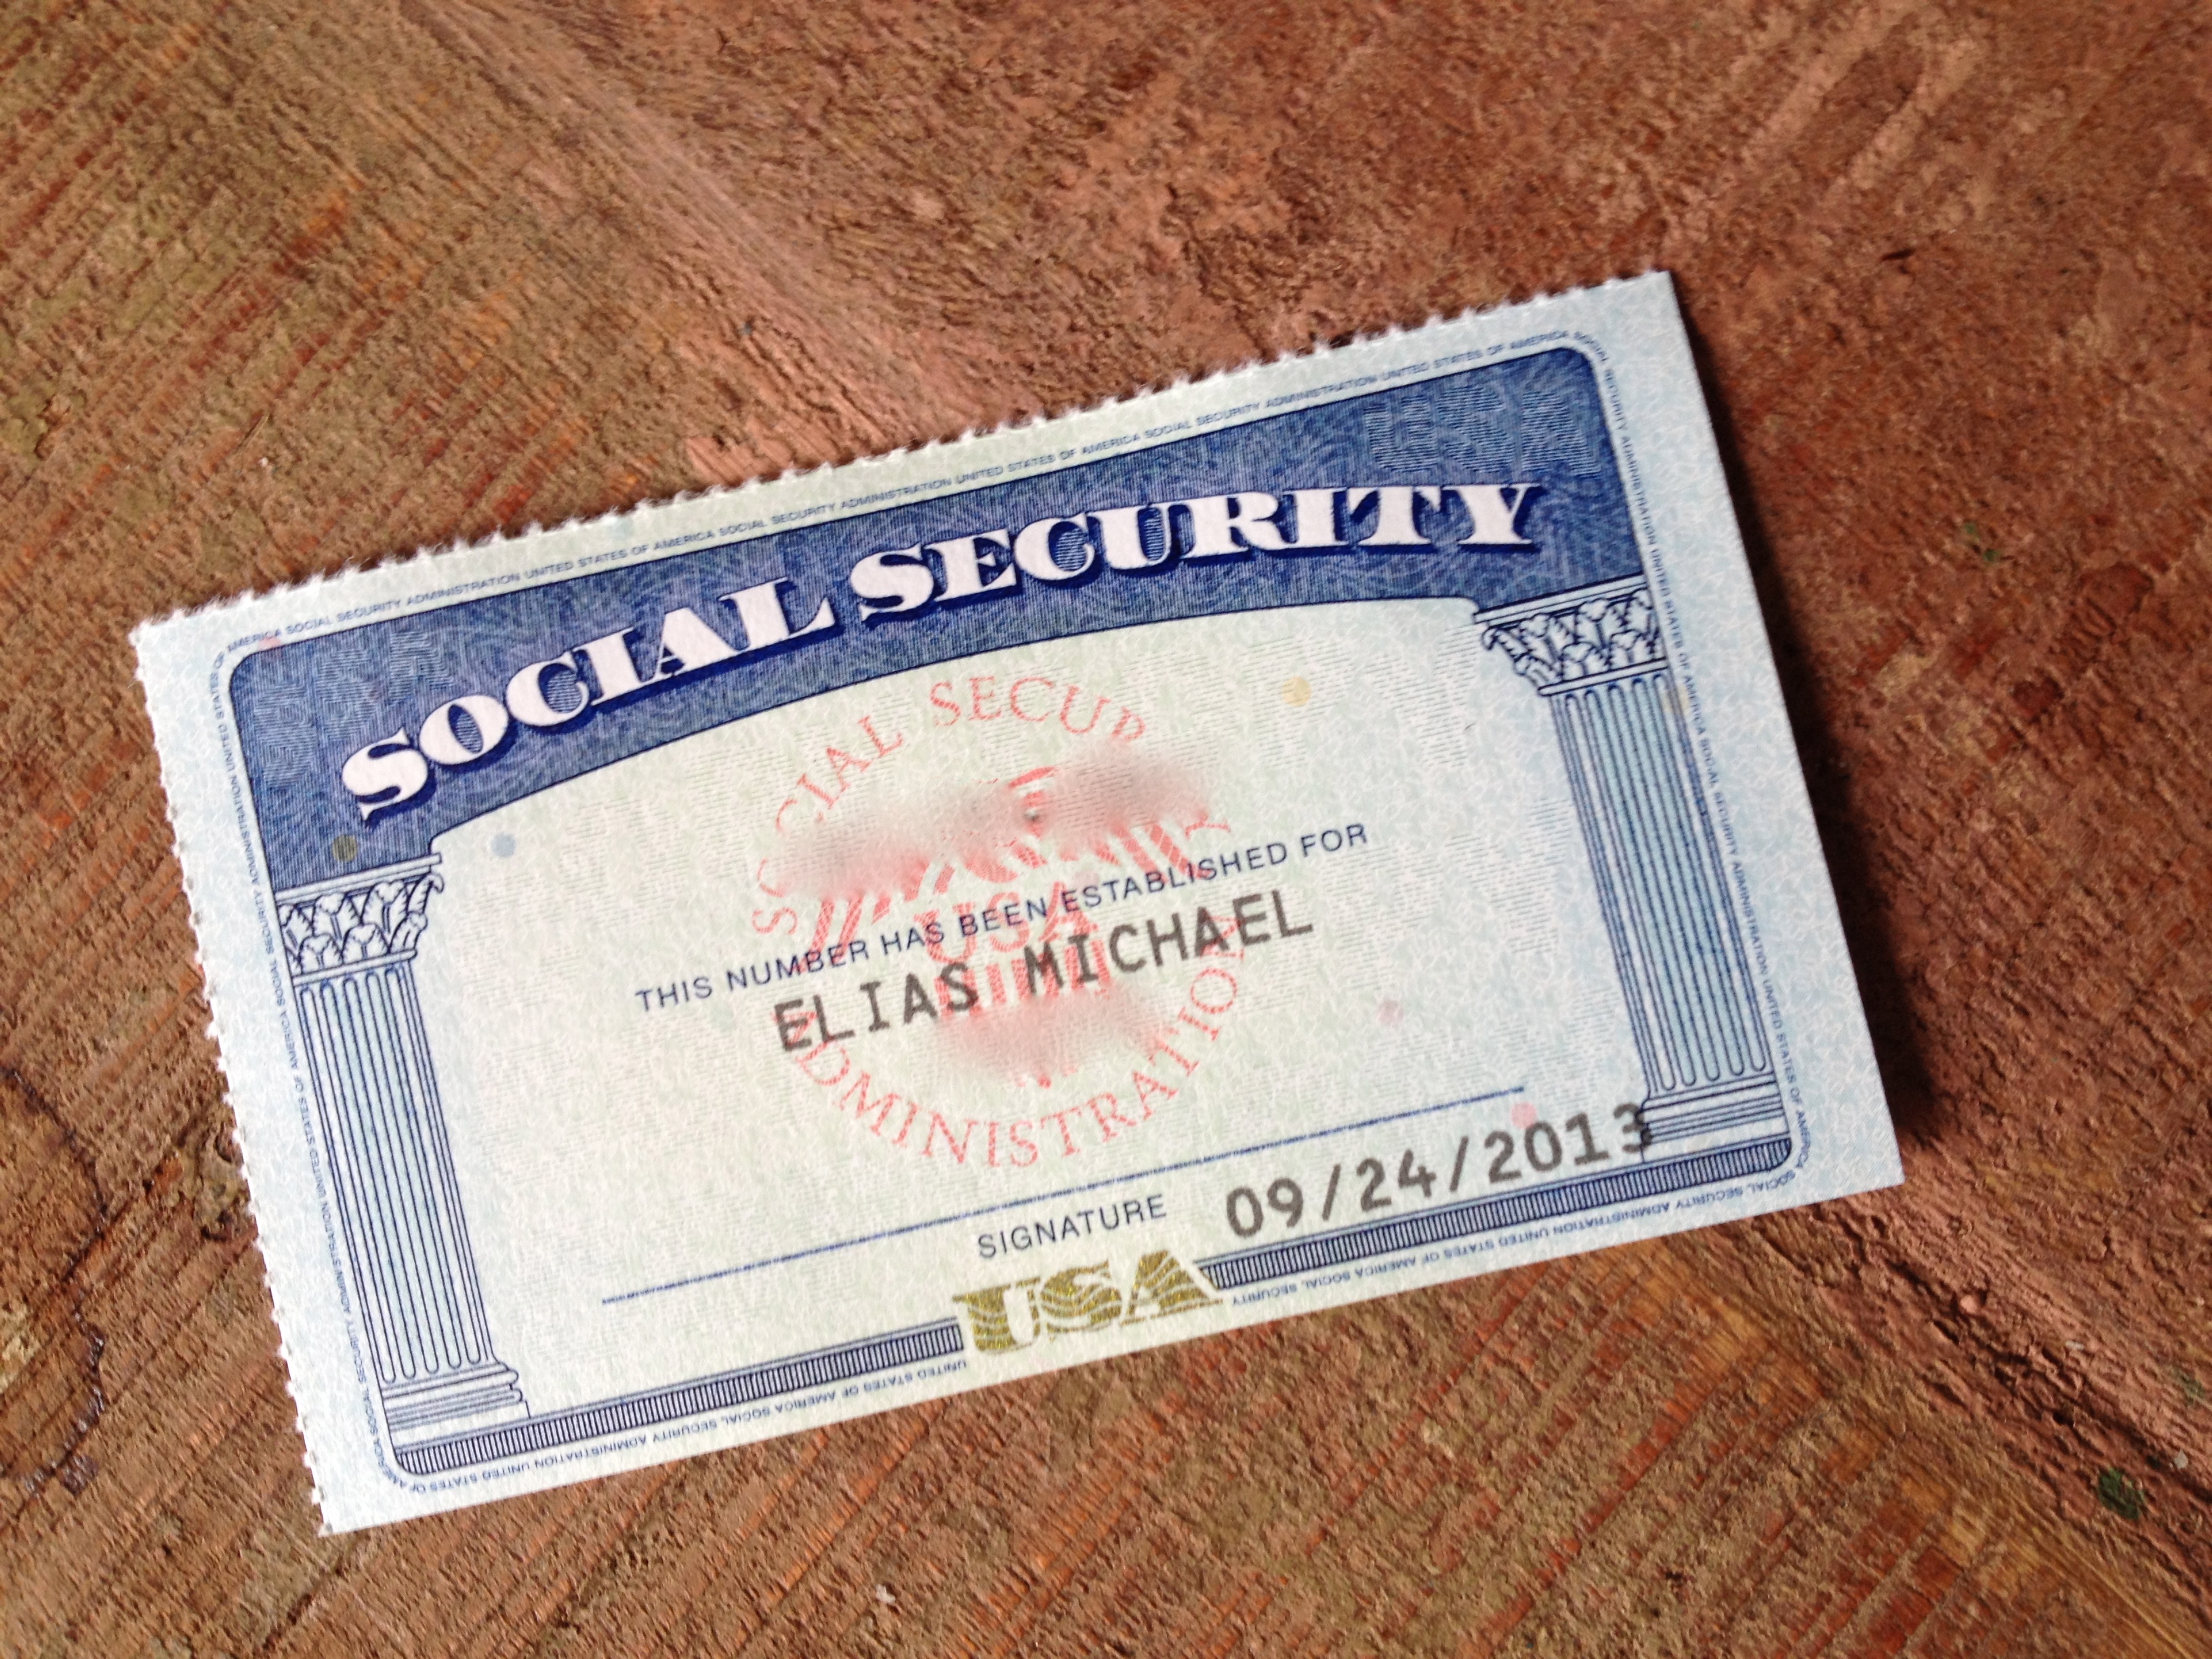 A Step-By-Step Guide on How A Non-US Citizen Can Get A Social Security